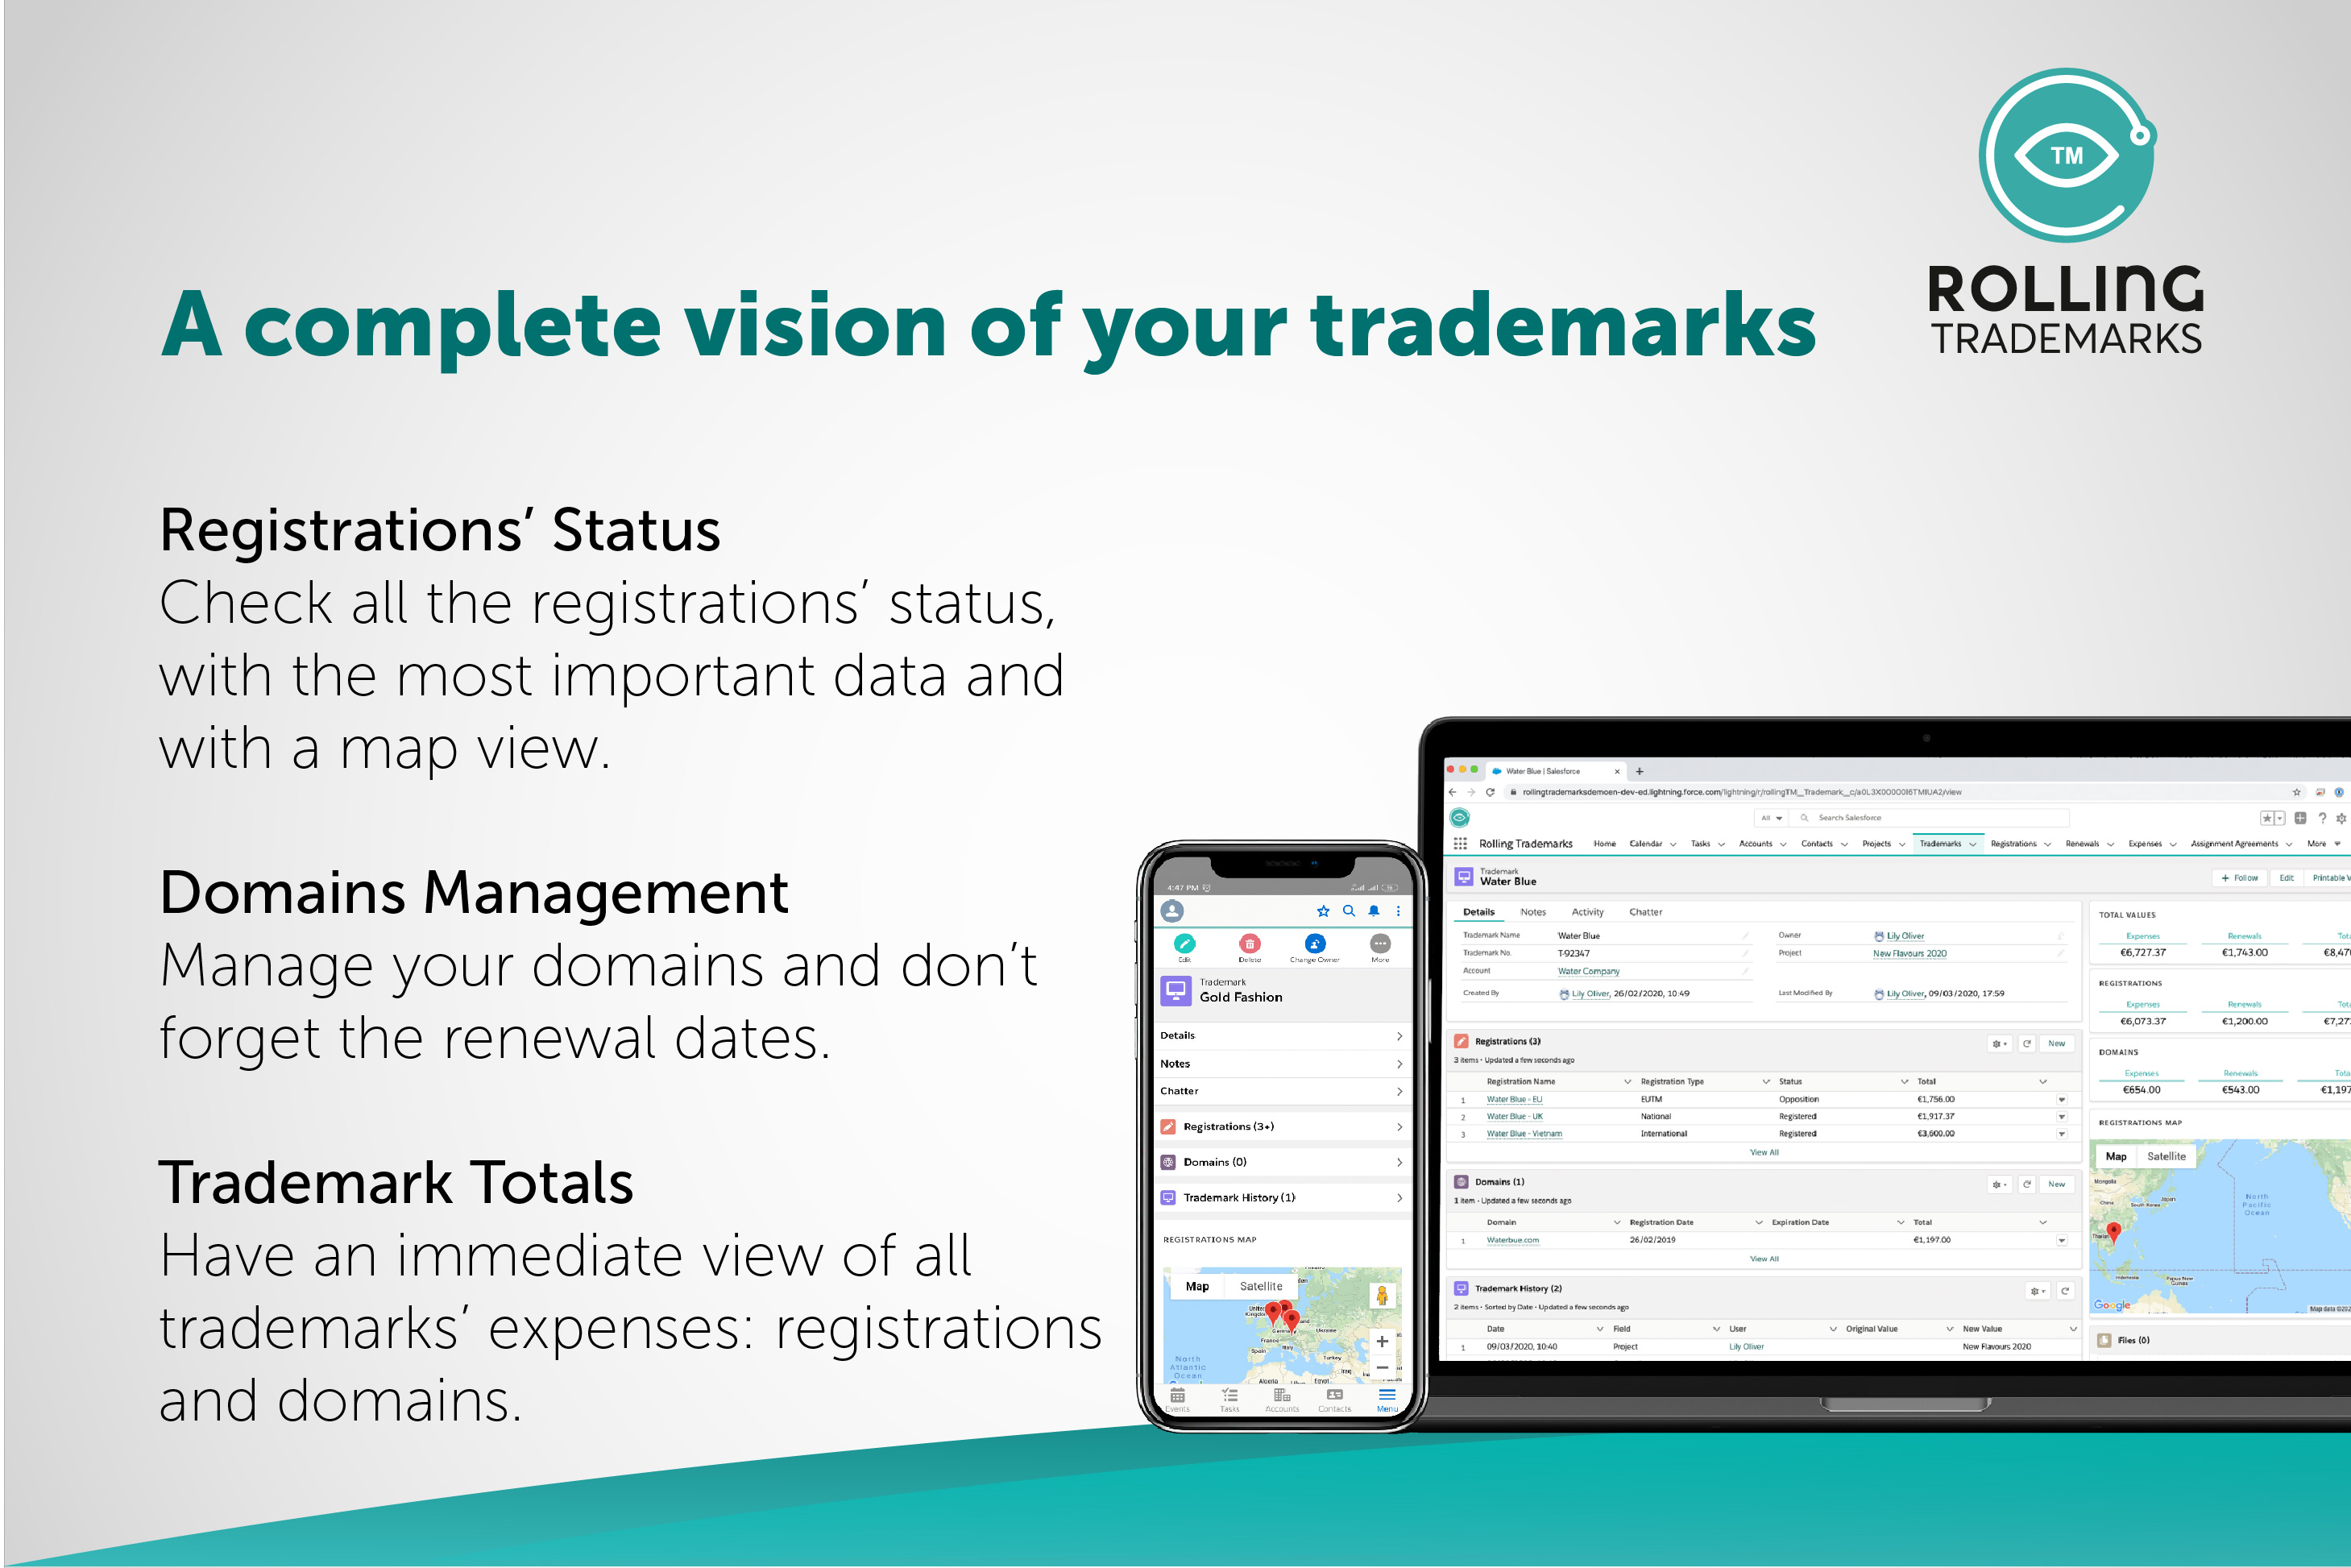 Rolling Trademarks: A complete vision of your trademarks